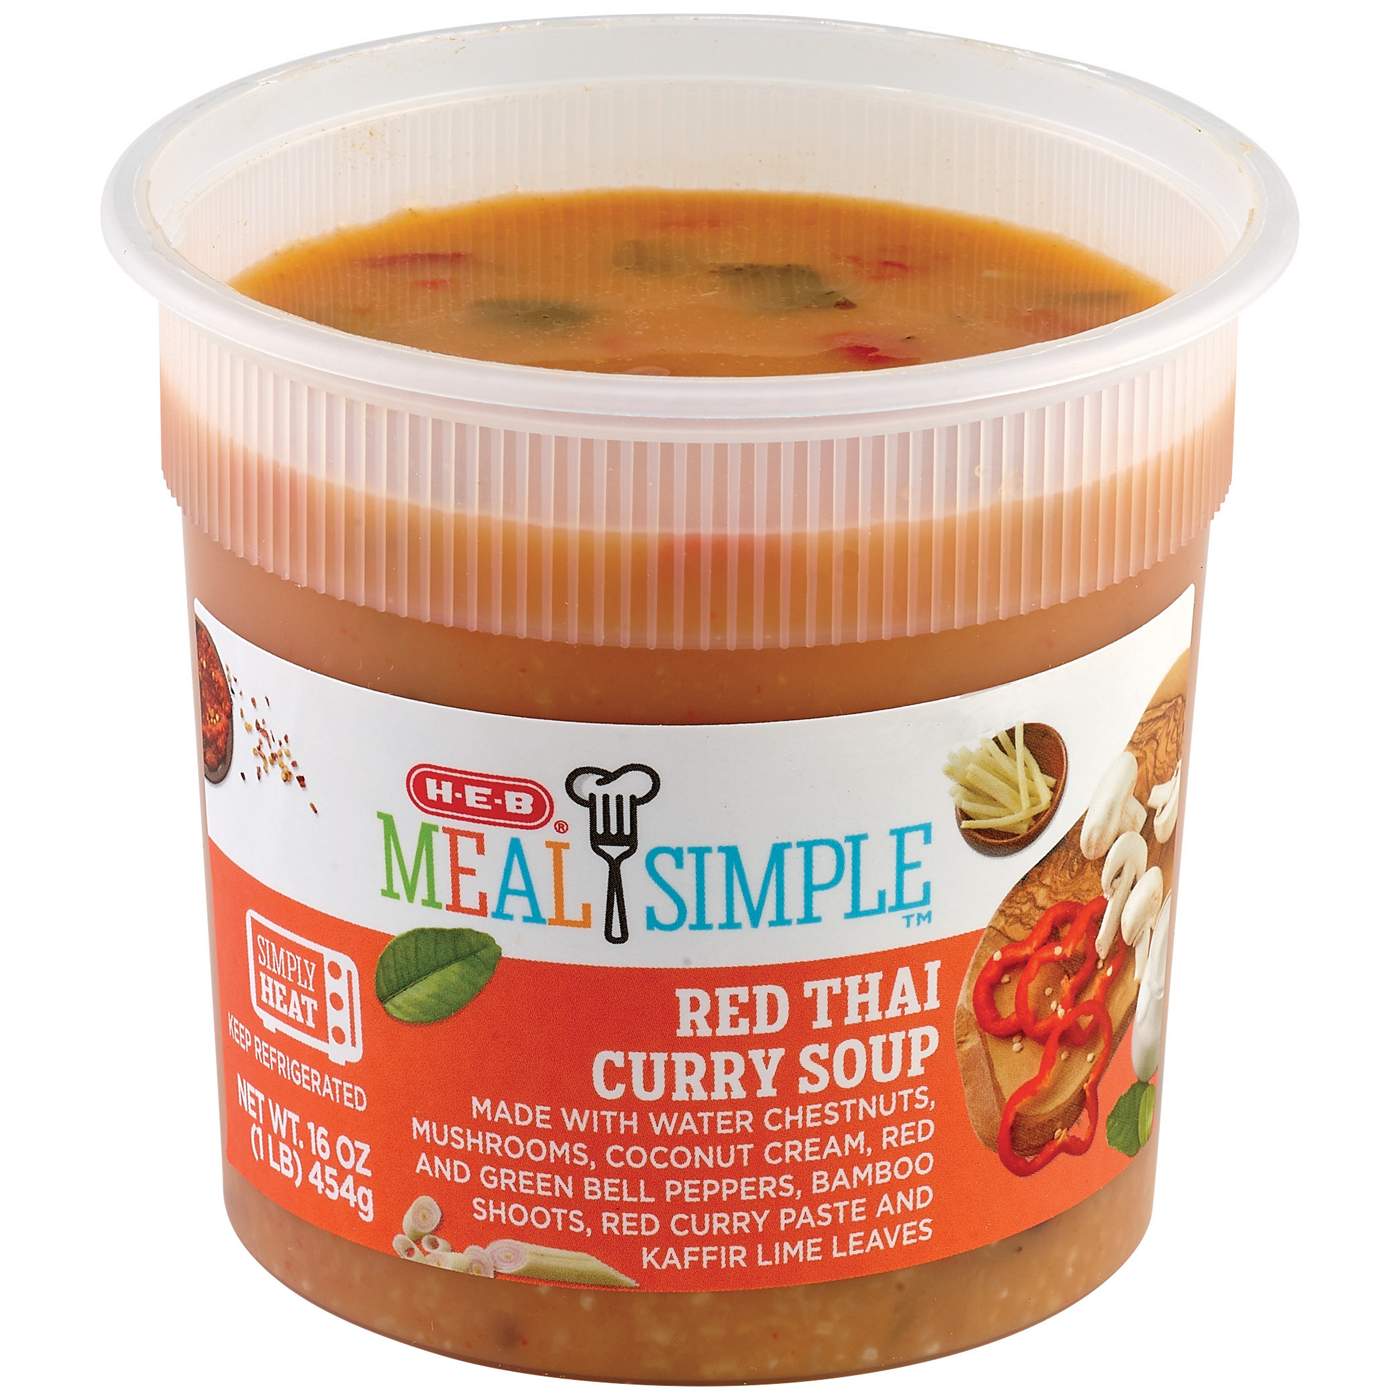 Meal Simple by H-E-B Red Thai Curry Soup; image 1 of 3